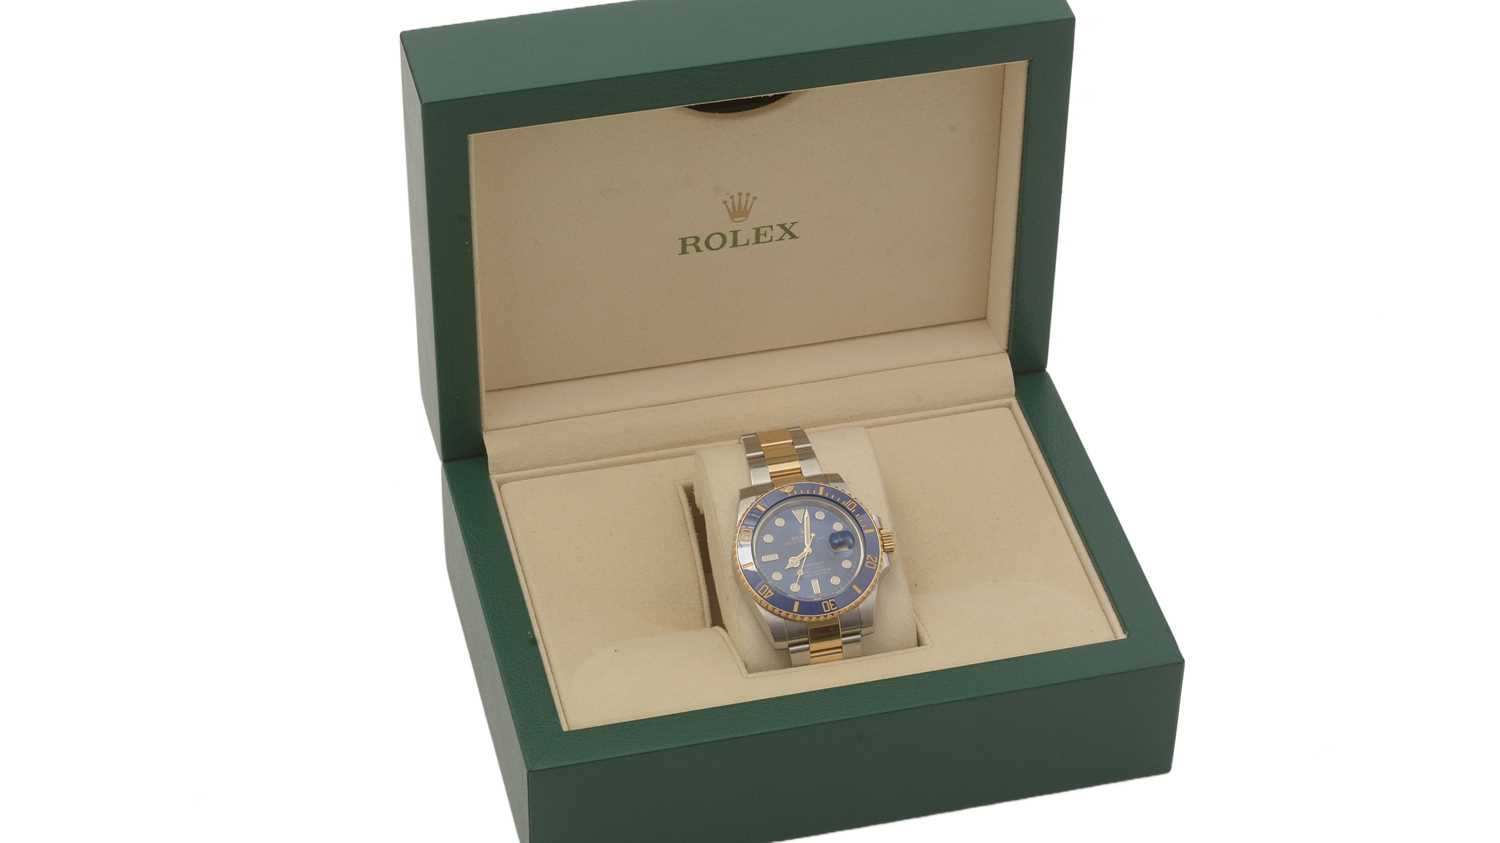 588 - Rolex Oyster Perpetual Date Submariner: a steel and gold cased automatic wristwatch